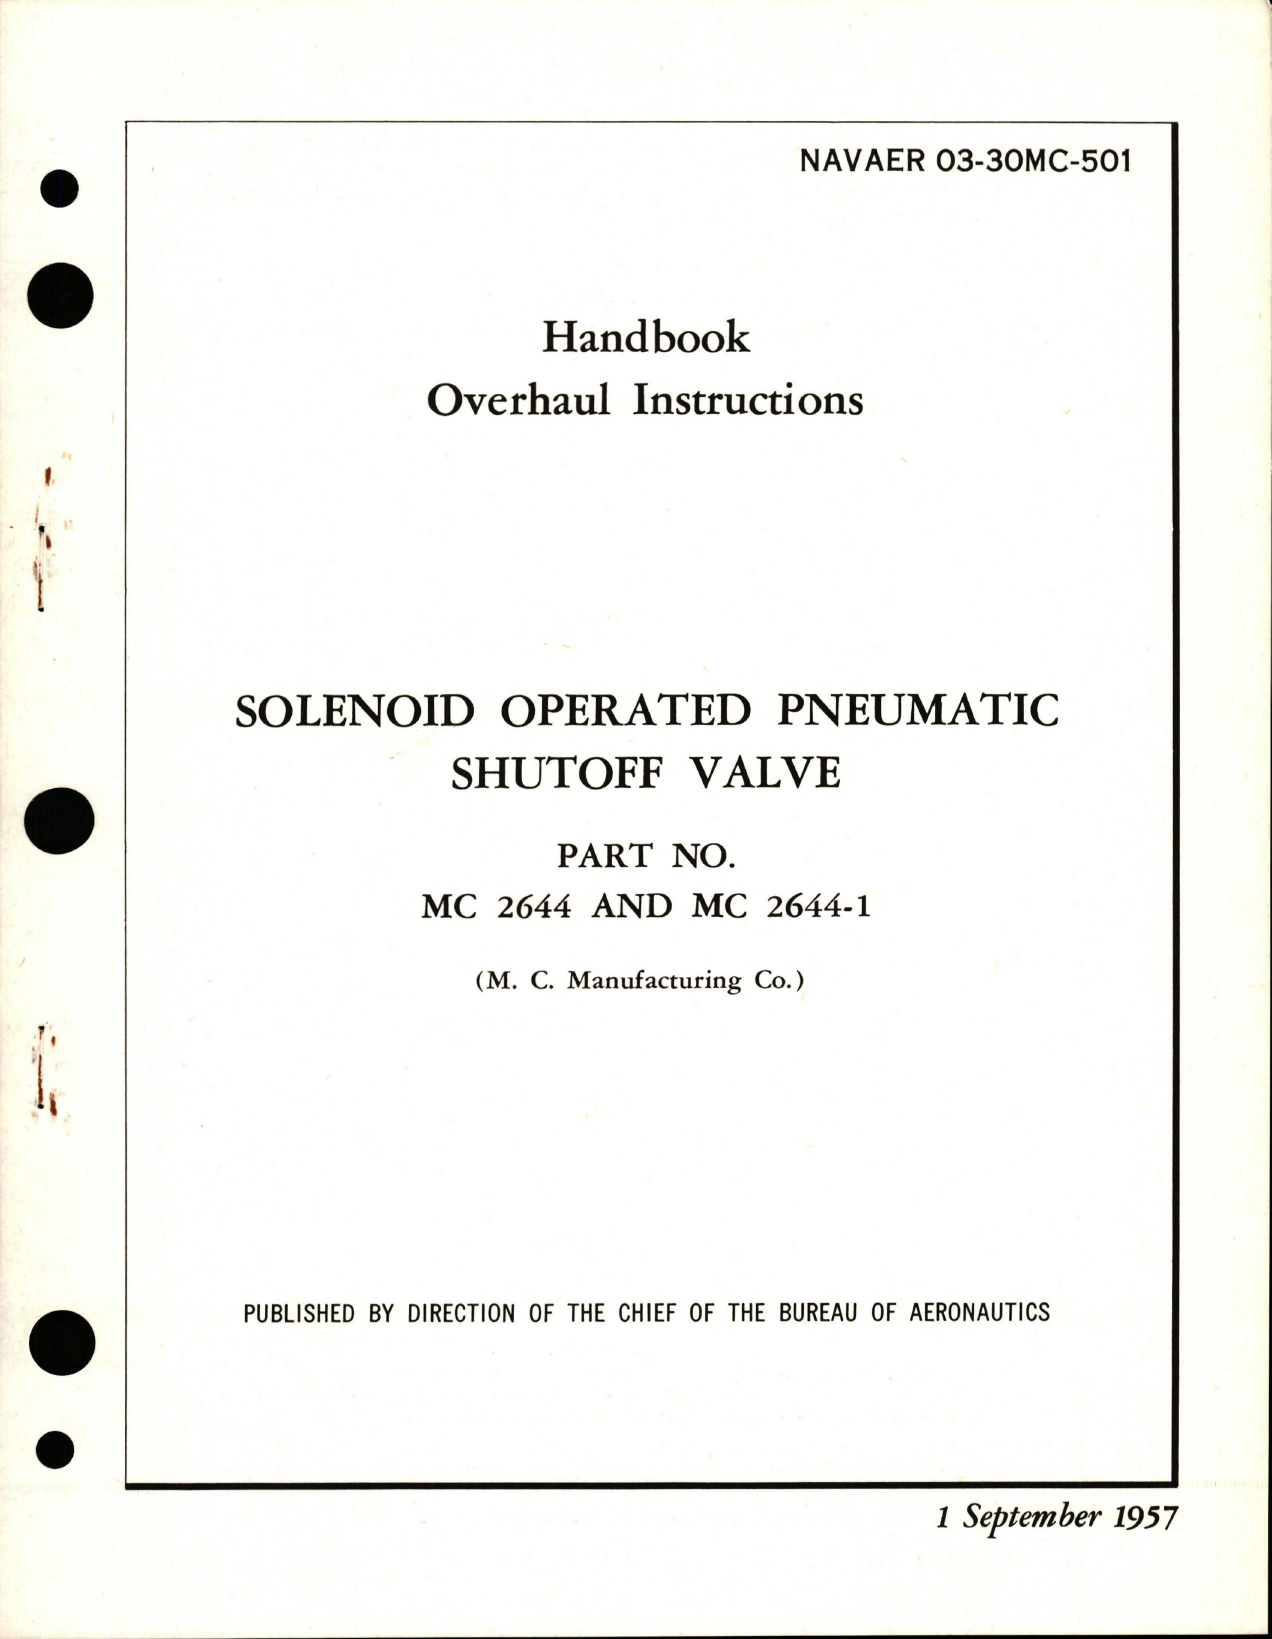 Sample page 1 from AirCorps Library document: Overhaul Instructions for Solenoid Operated Pneumatic Shutoff Valve - Parts MC 2644 and MC 2644-1